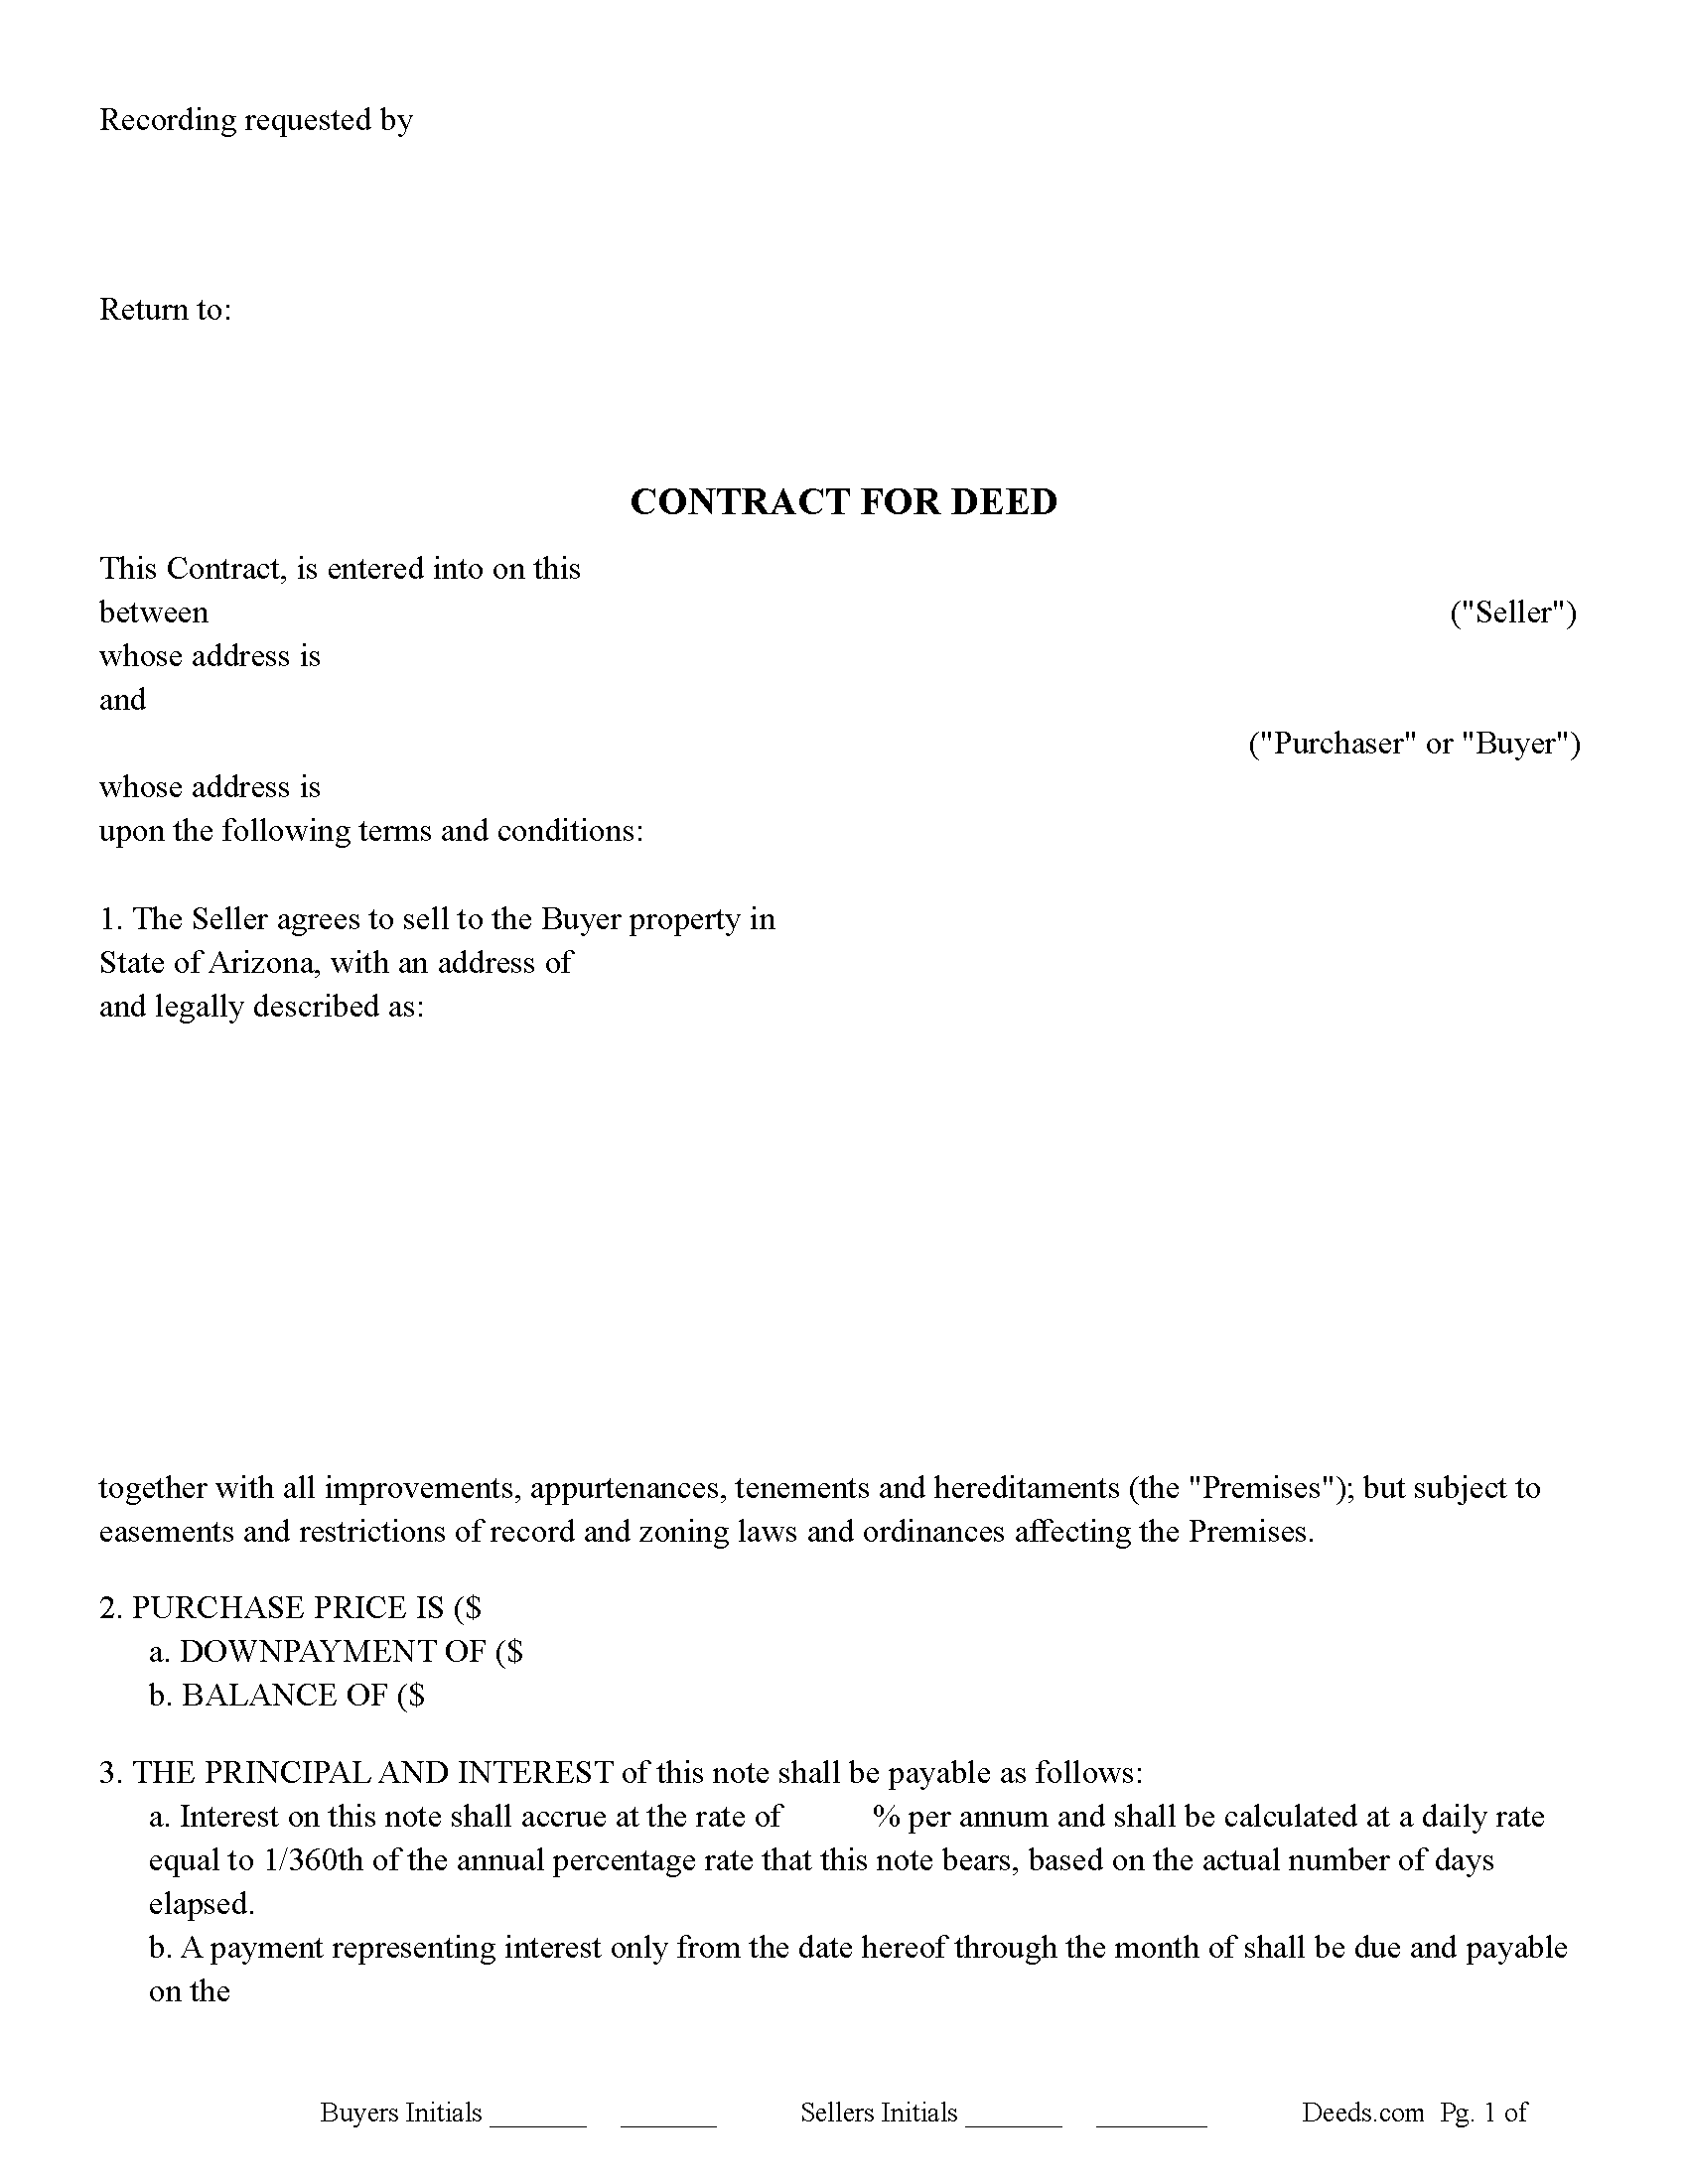 Coconino County Contract for Deed Form